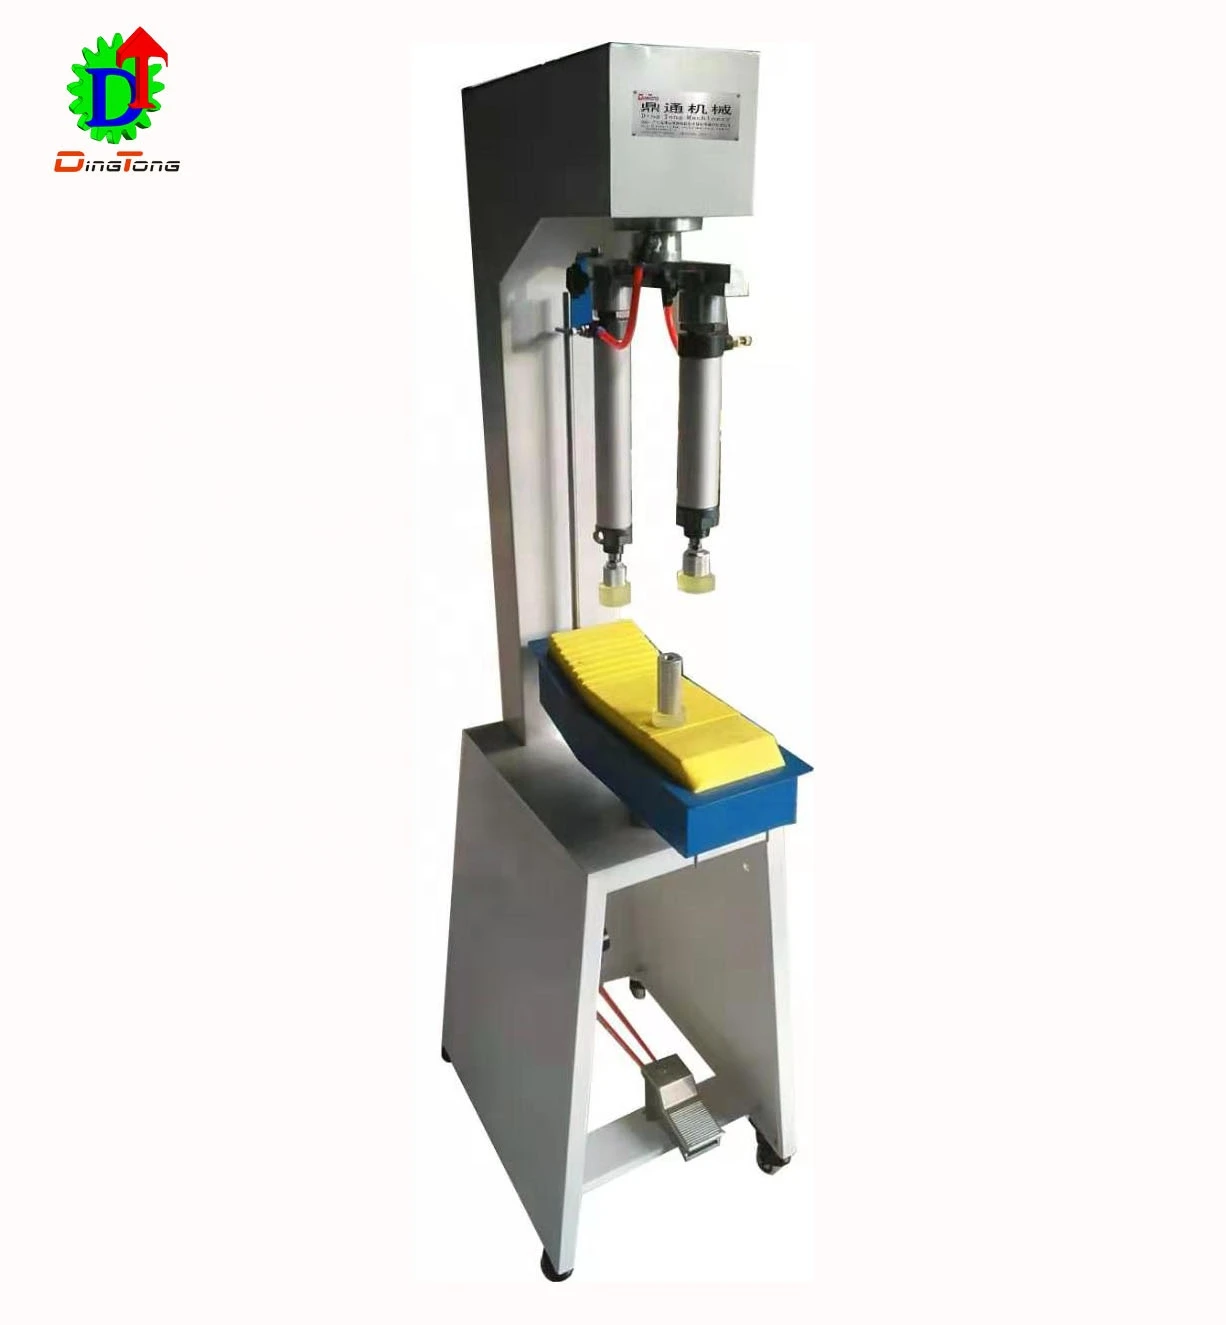 China Supplier Hot-selling Pneumatic Marking Machine For Shoe Soles